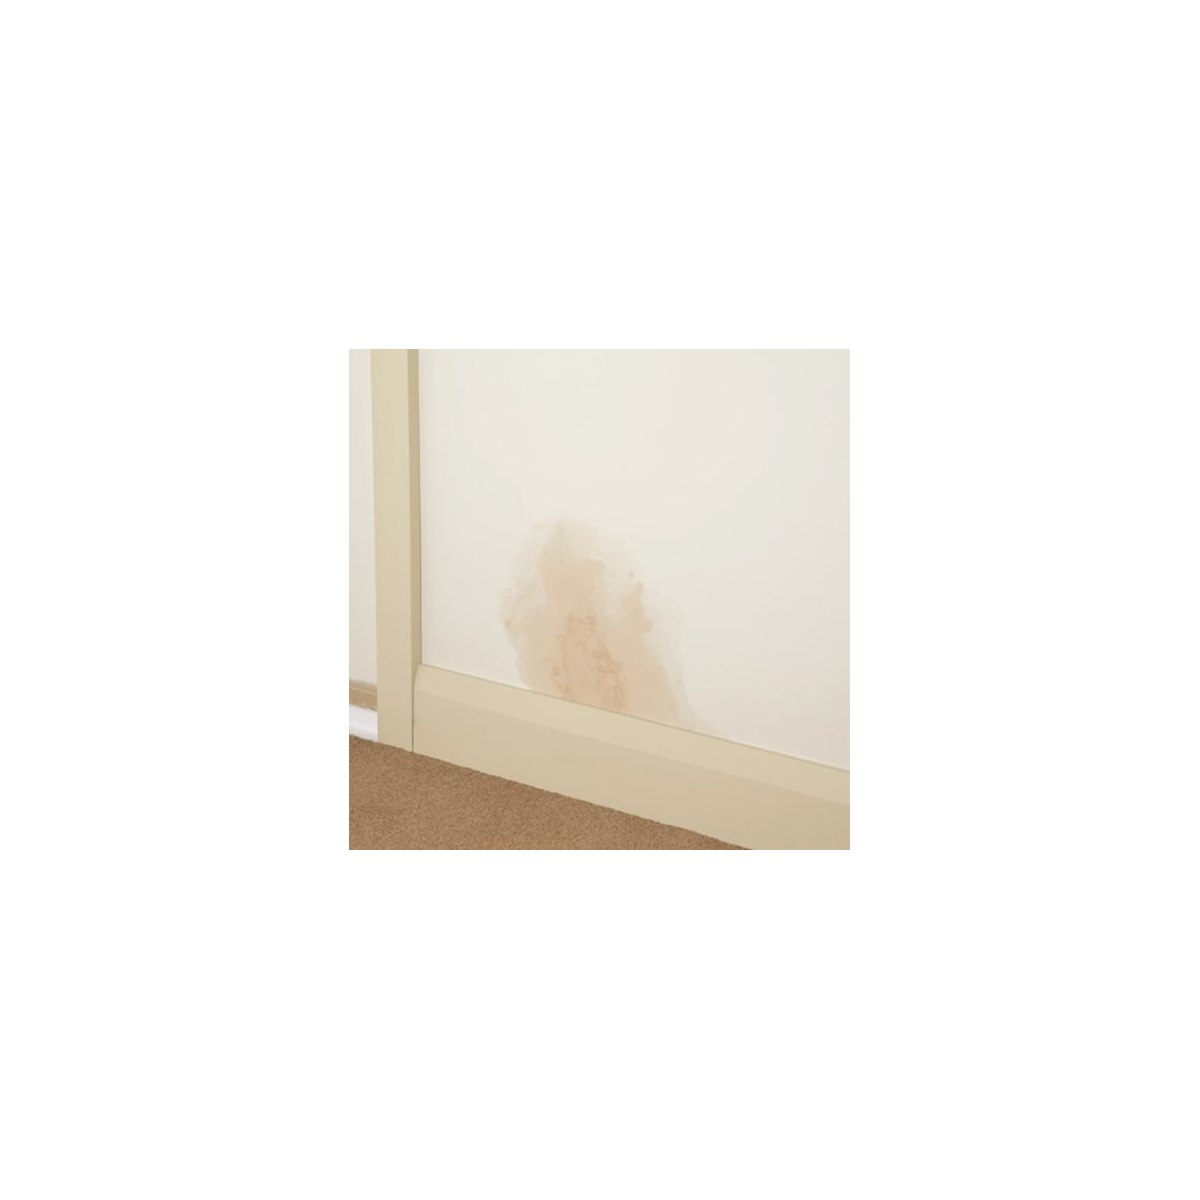 Damp seal paint for damp patches on walls